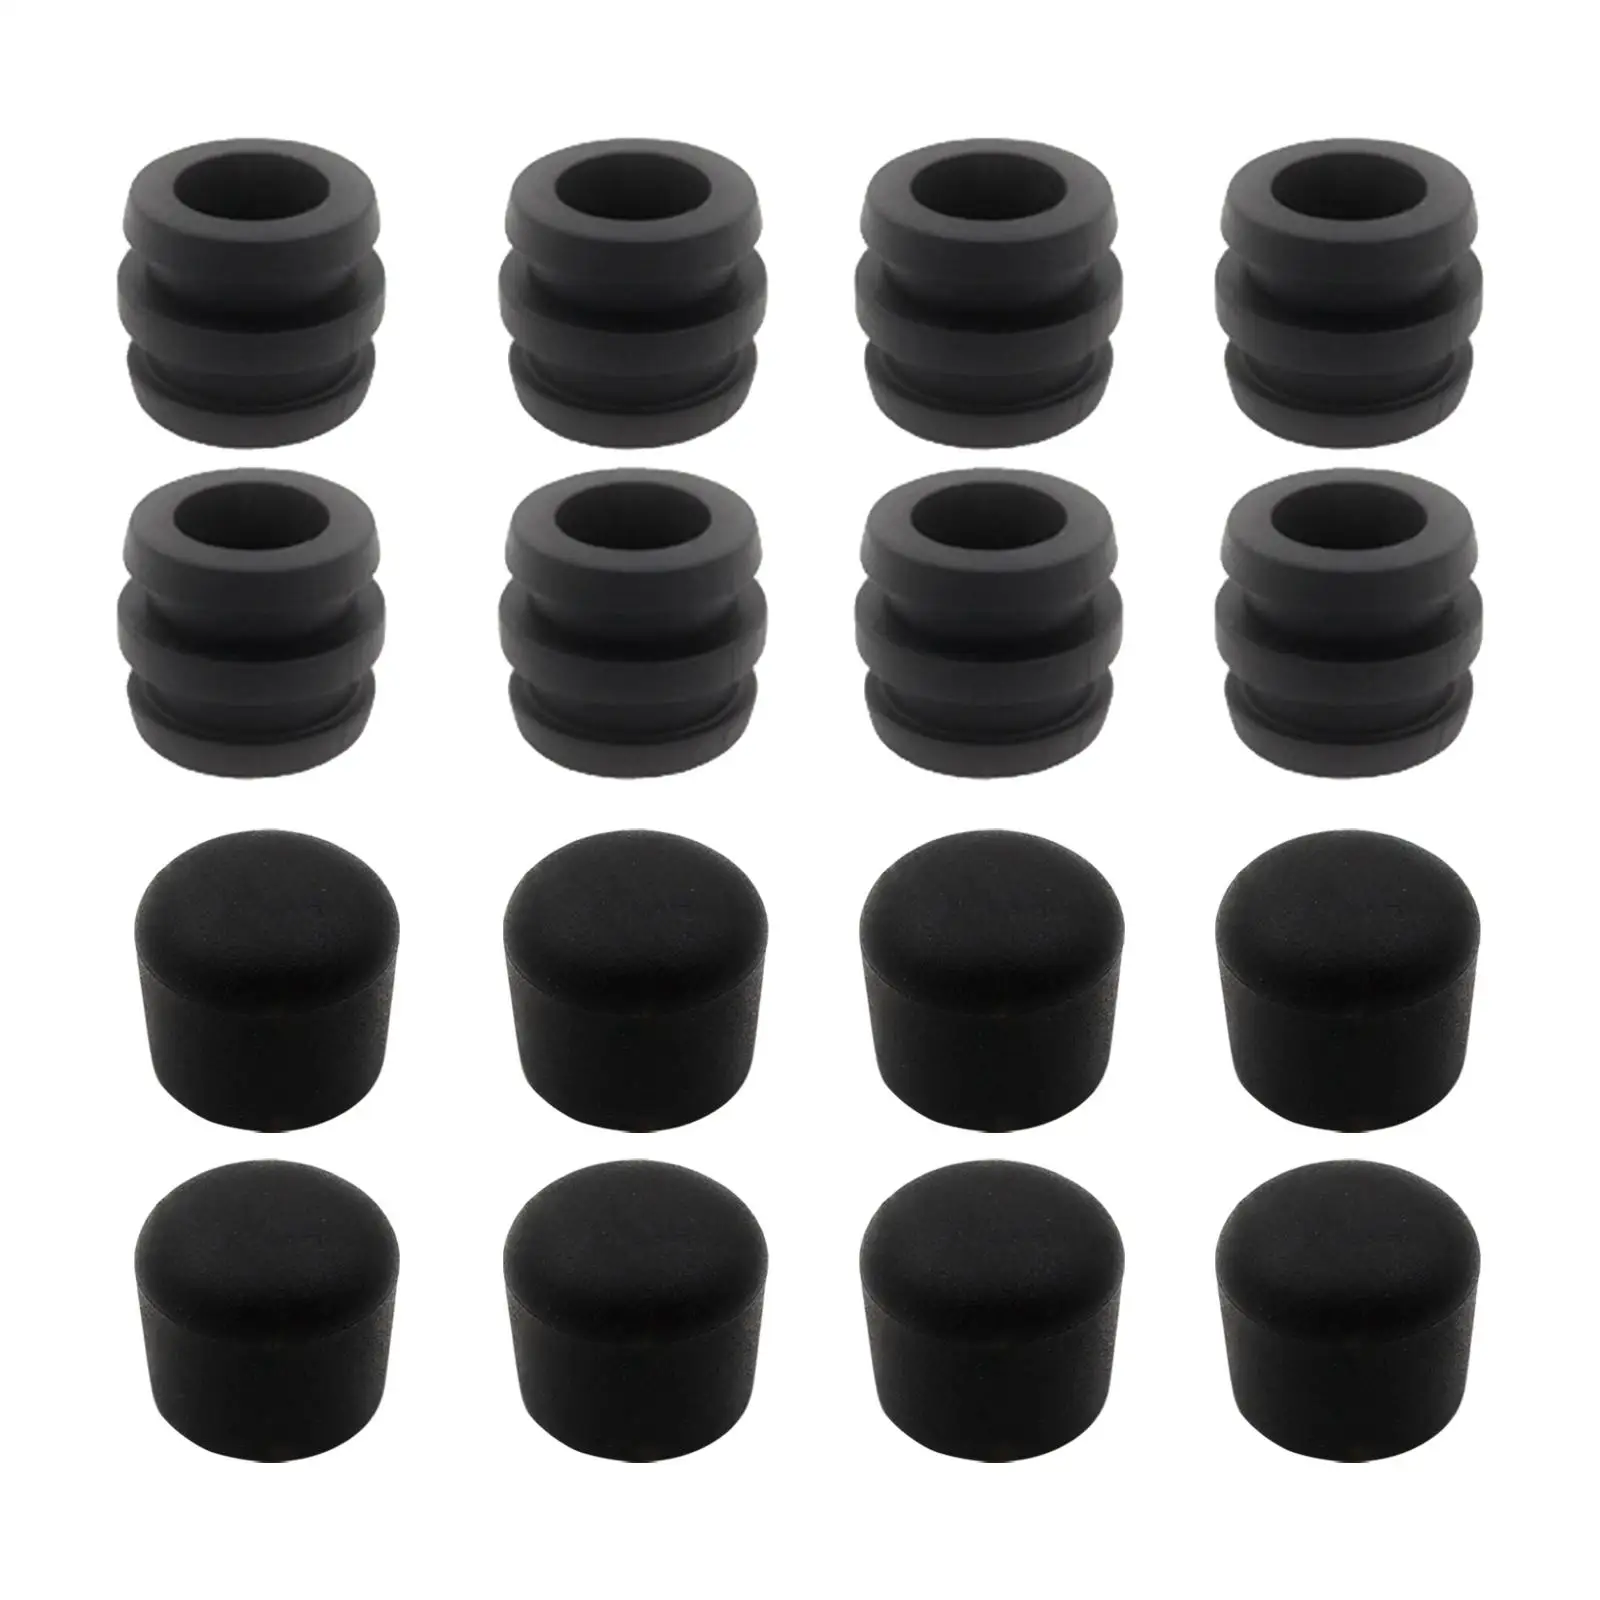 Rod Bumpers End Caps Plastic Foosball Ball Replacement Parts Rubber Bumper